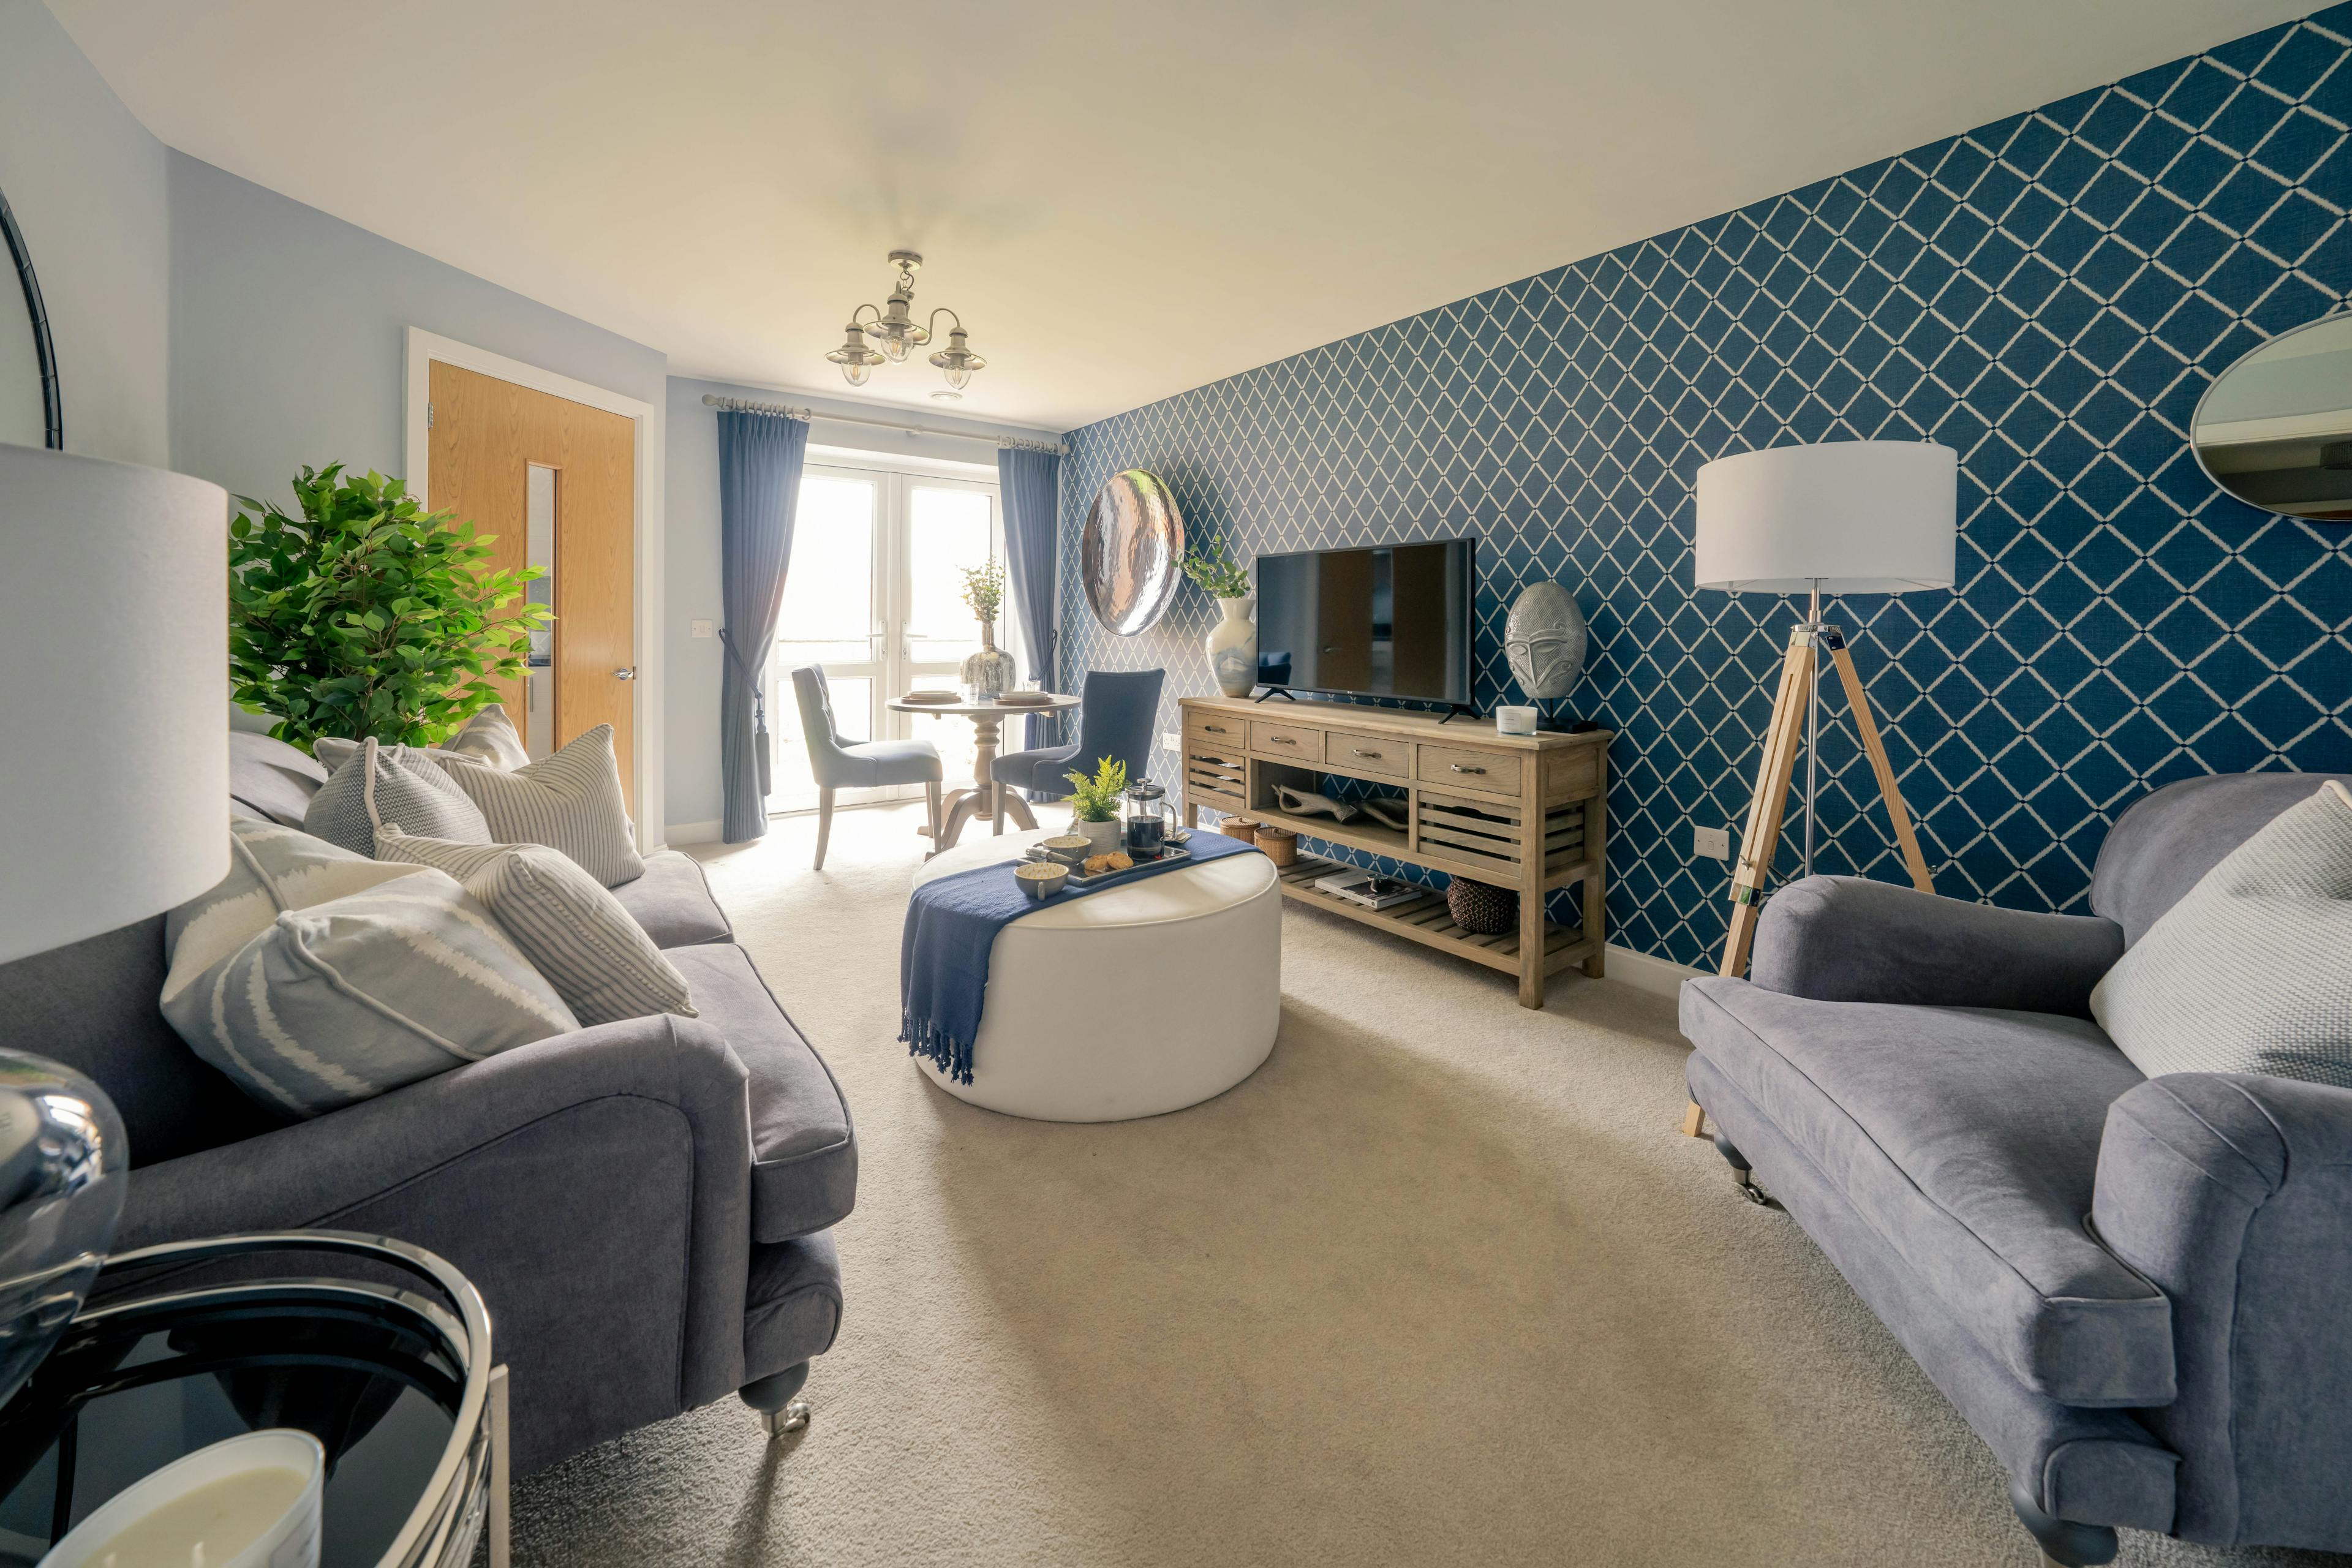 Living Room at Glenhills Court Retirement Development in Leicester, Leicestershire 